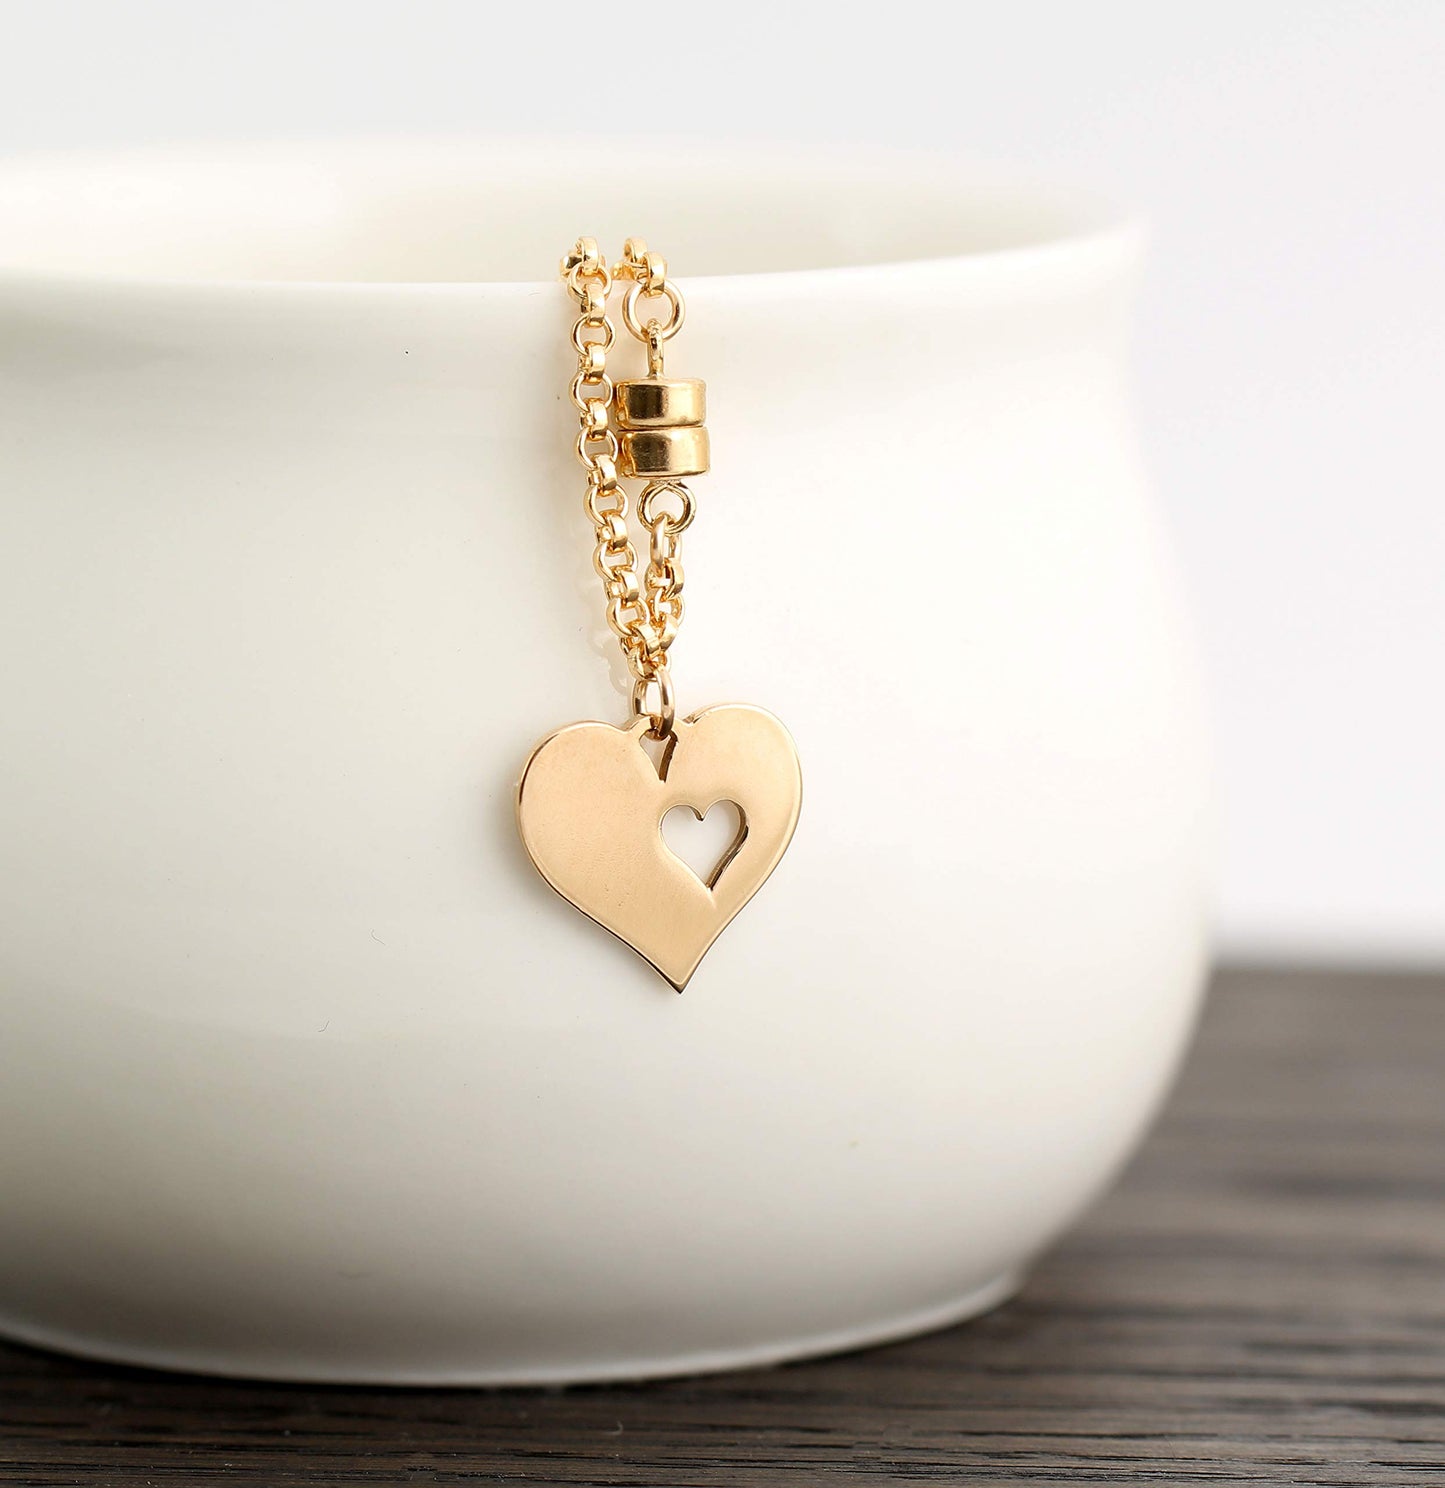 Gold Grandmother Granddaughter Bracelet with Card • Two Connected Hearts Bracelet • Gifts for Women • Grandmother Jewelry • 14k Gold Filled Bracelet • MAGNETIC CLASP • Gifts for Grandma Granddaughter